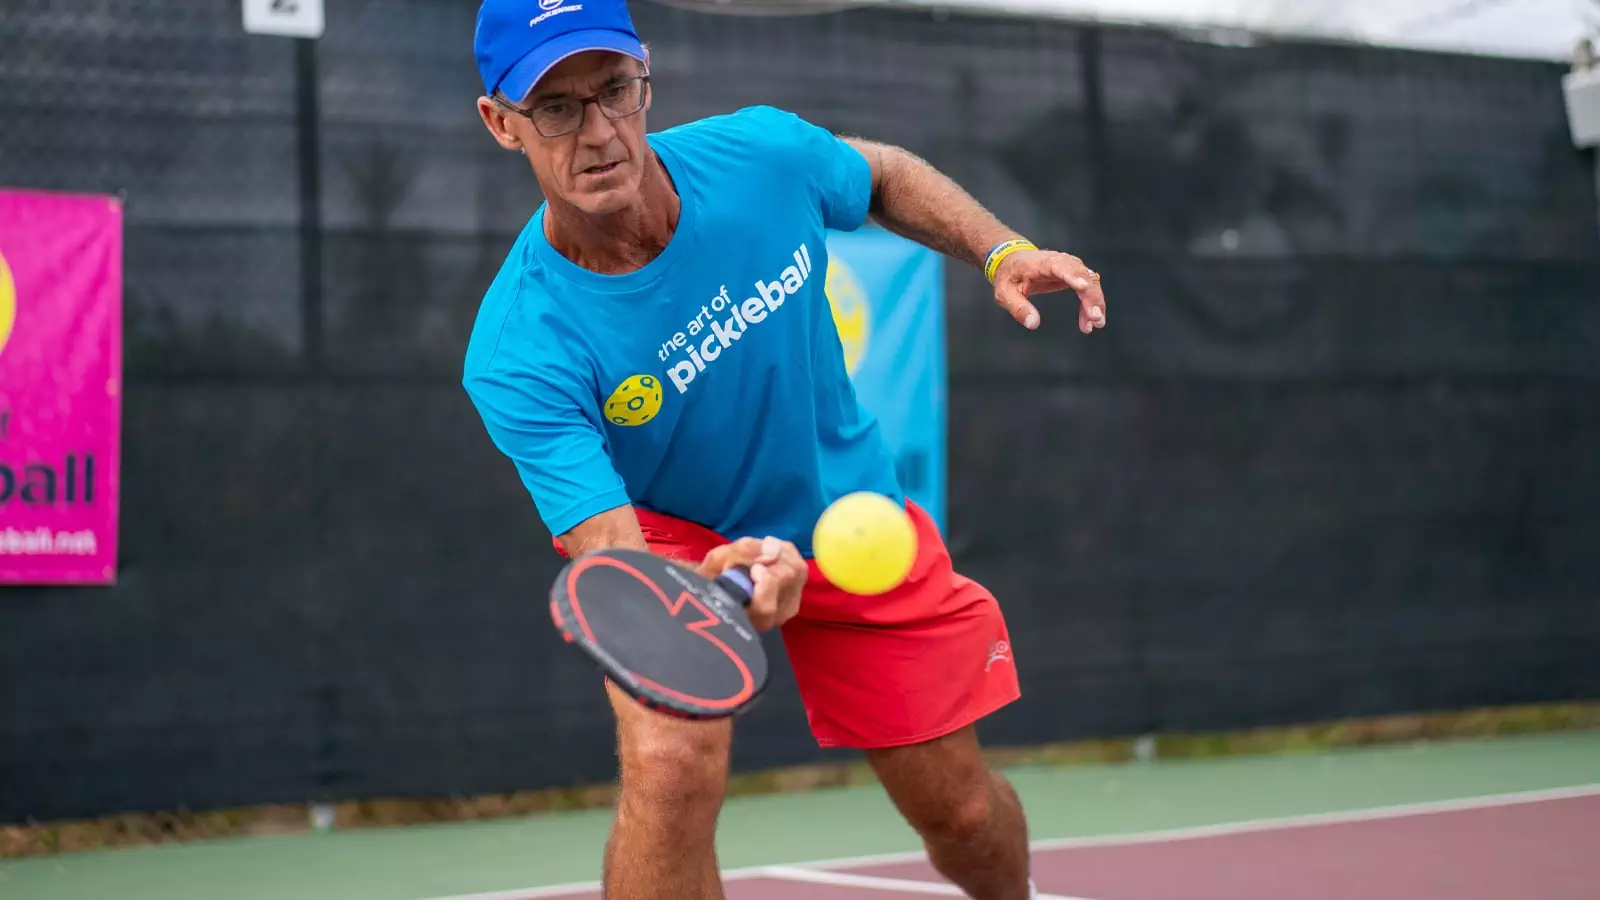 The Best Ways to Return a Serve in Pickleball